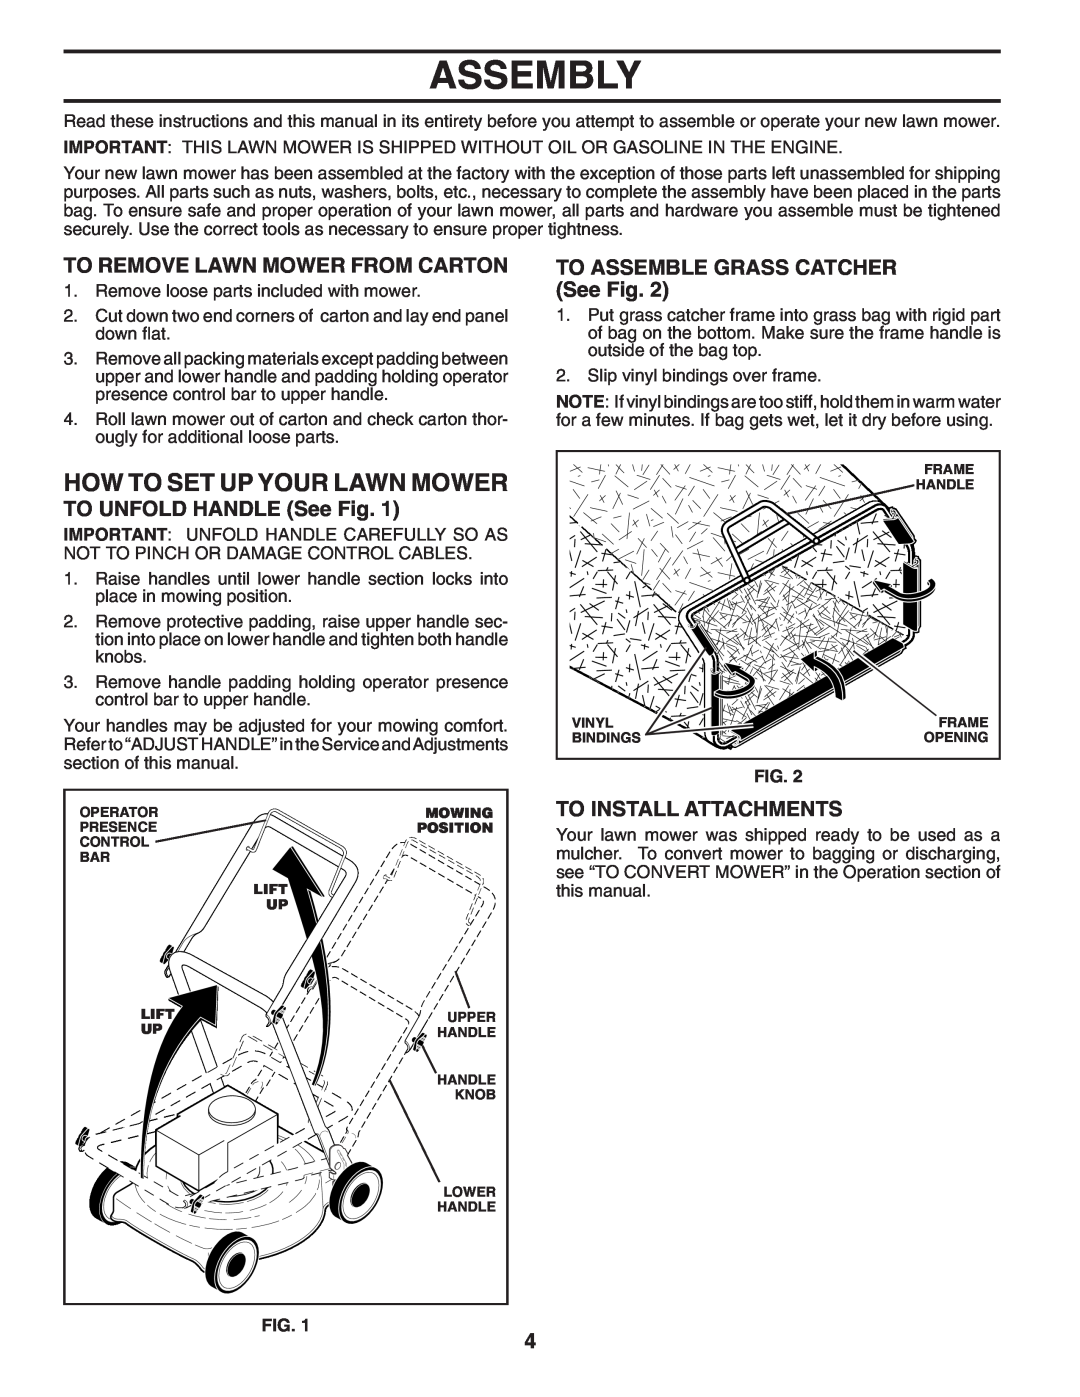 Husqvarna 7021P Assembly, How To Set Up Your Lawn Mower, To Remove Lawn Mower From Carton, TO UNFOLD HANDLE See Fig 